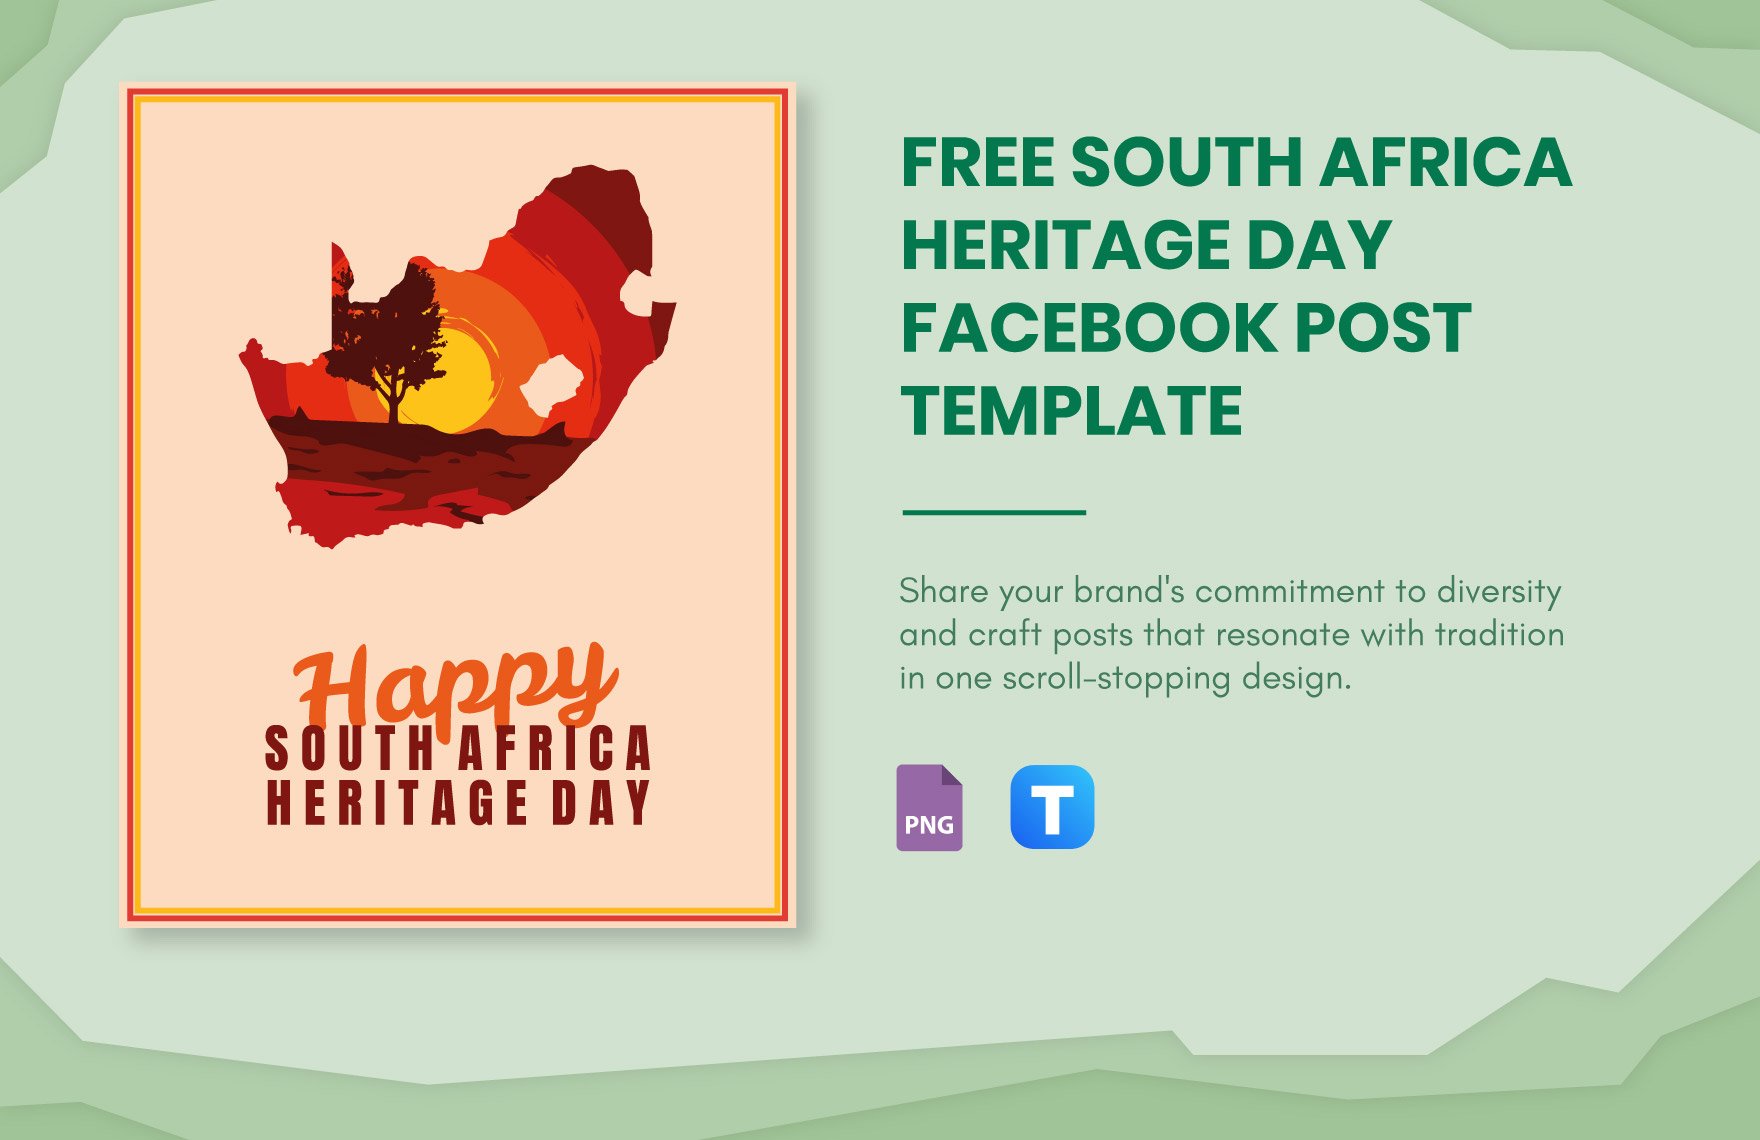 South Africa Heritage Day Facebook Post Template